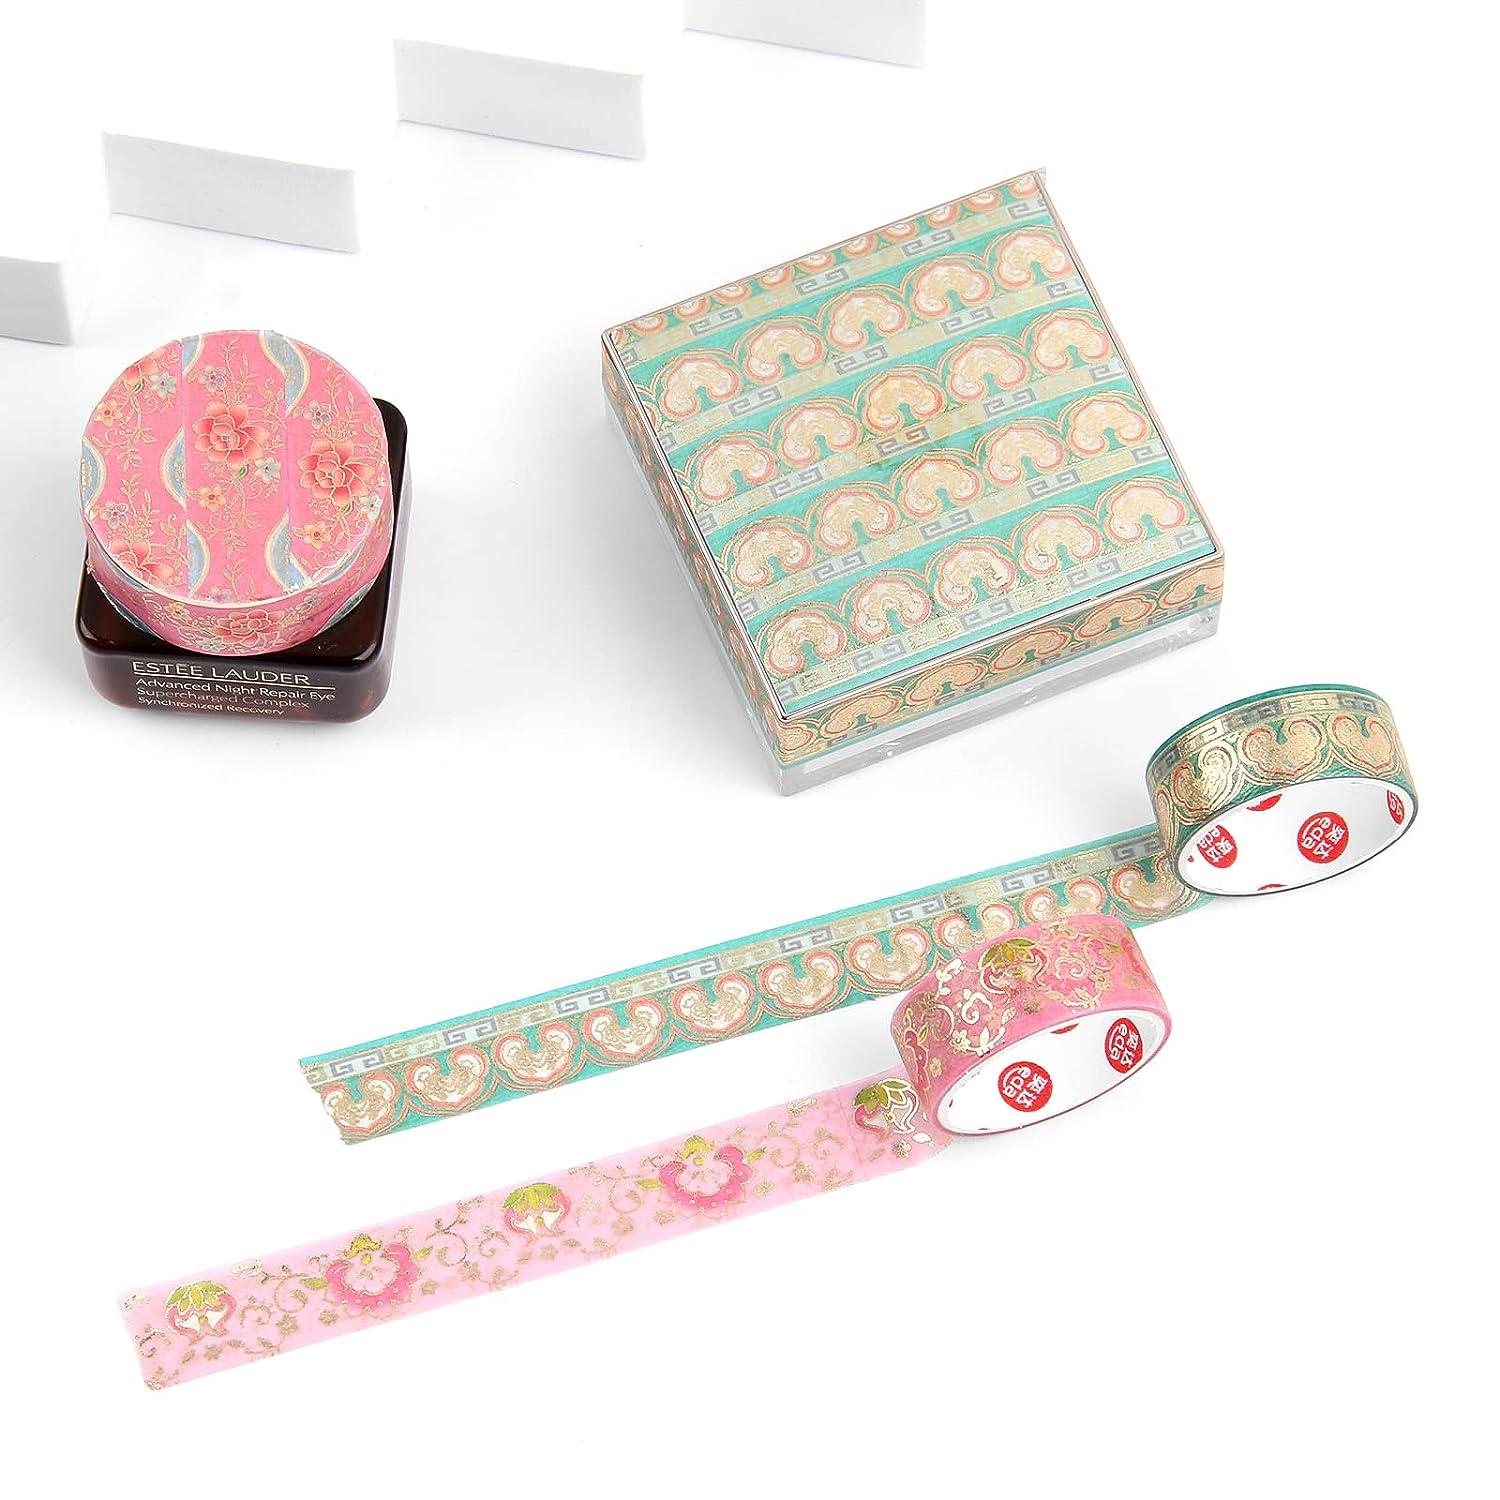 Recollections Crafting Tape Box  First Impression & Review 